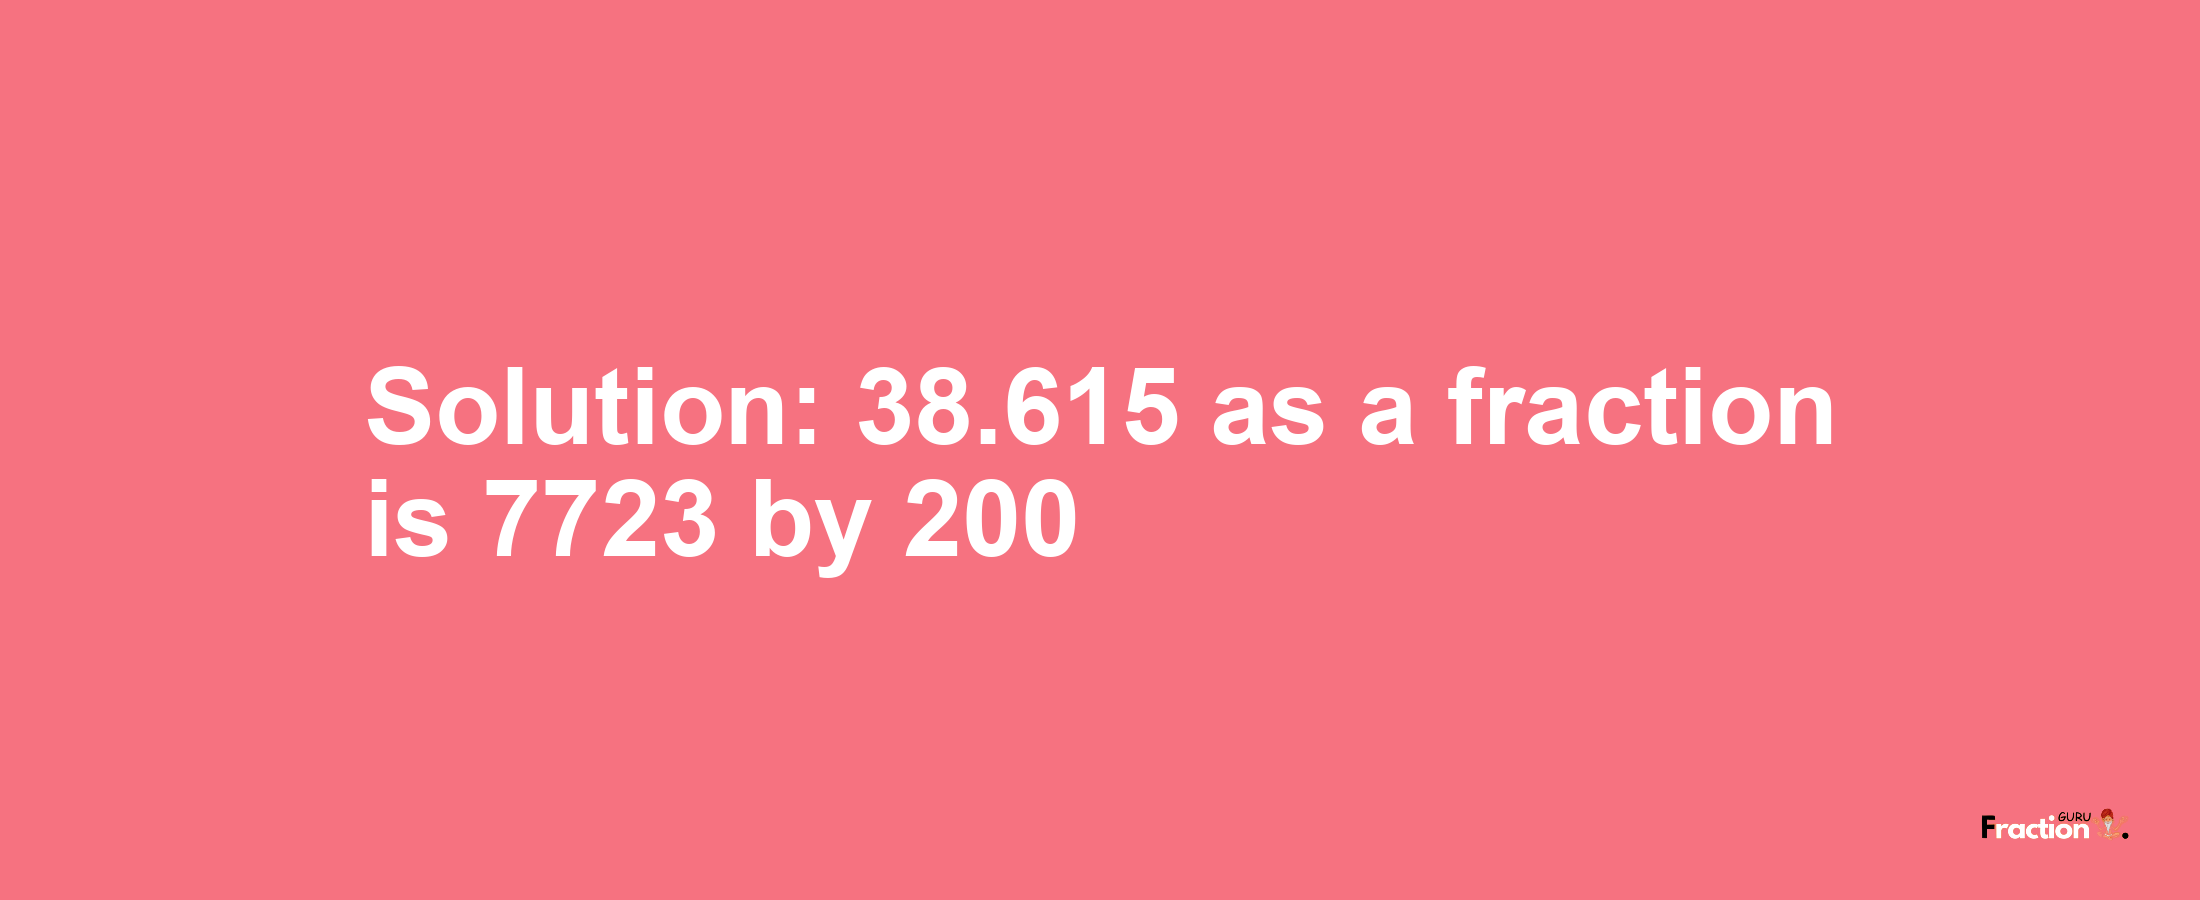 Solution:38.615 as a fraction is 7723/200